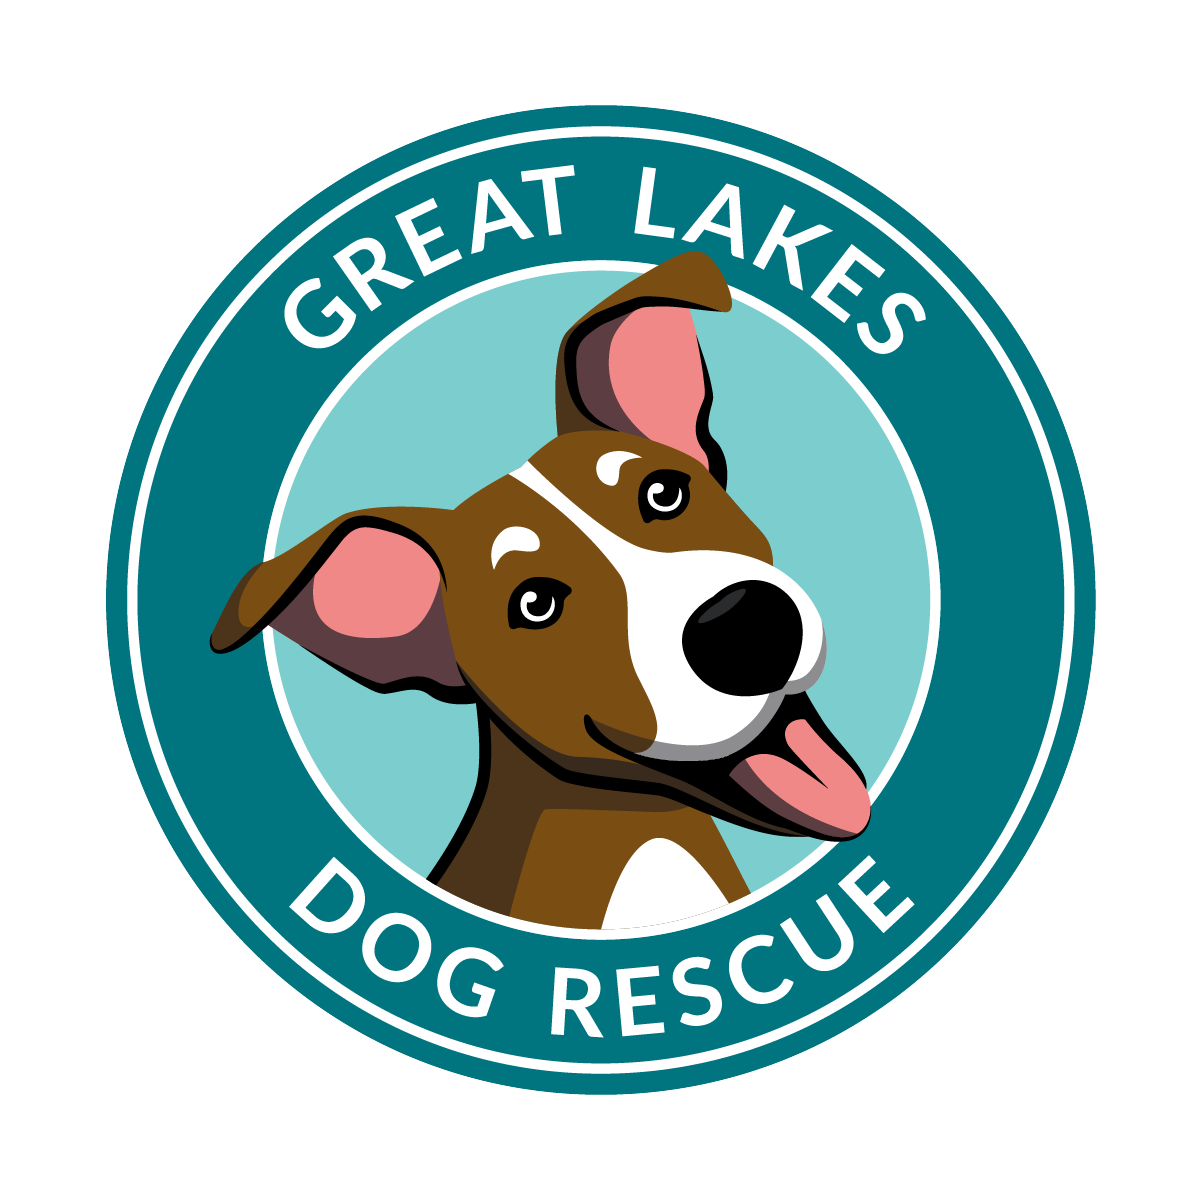 Great Lakes Dog Rescue